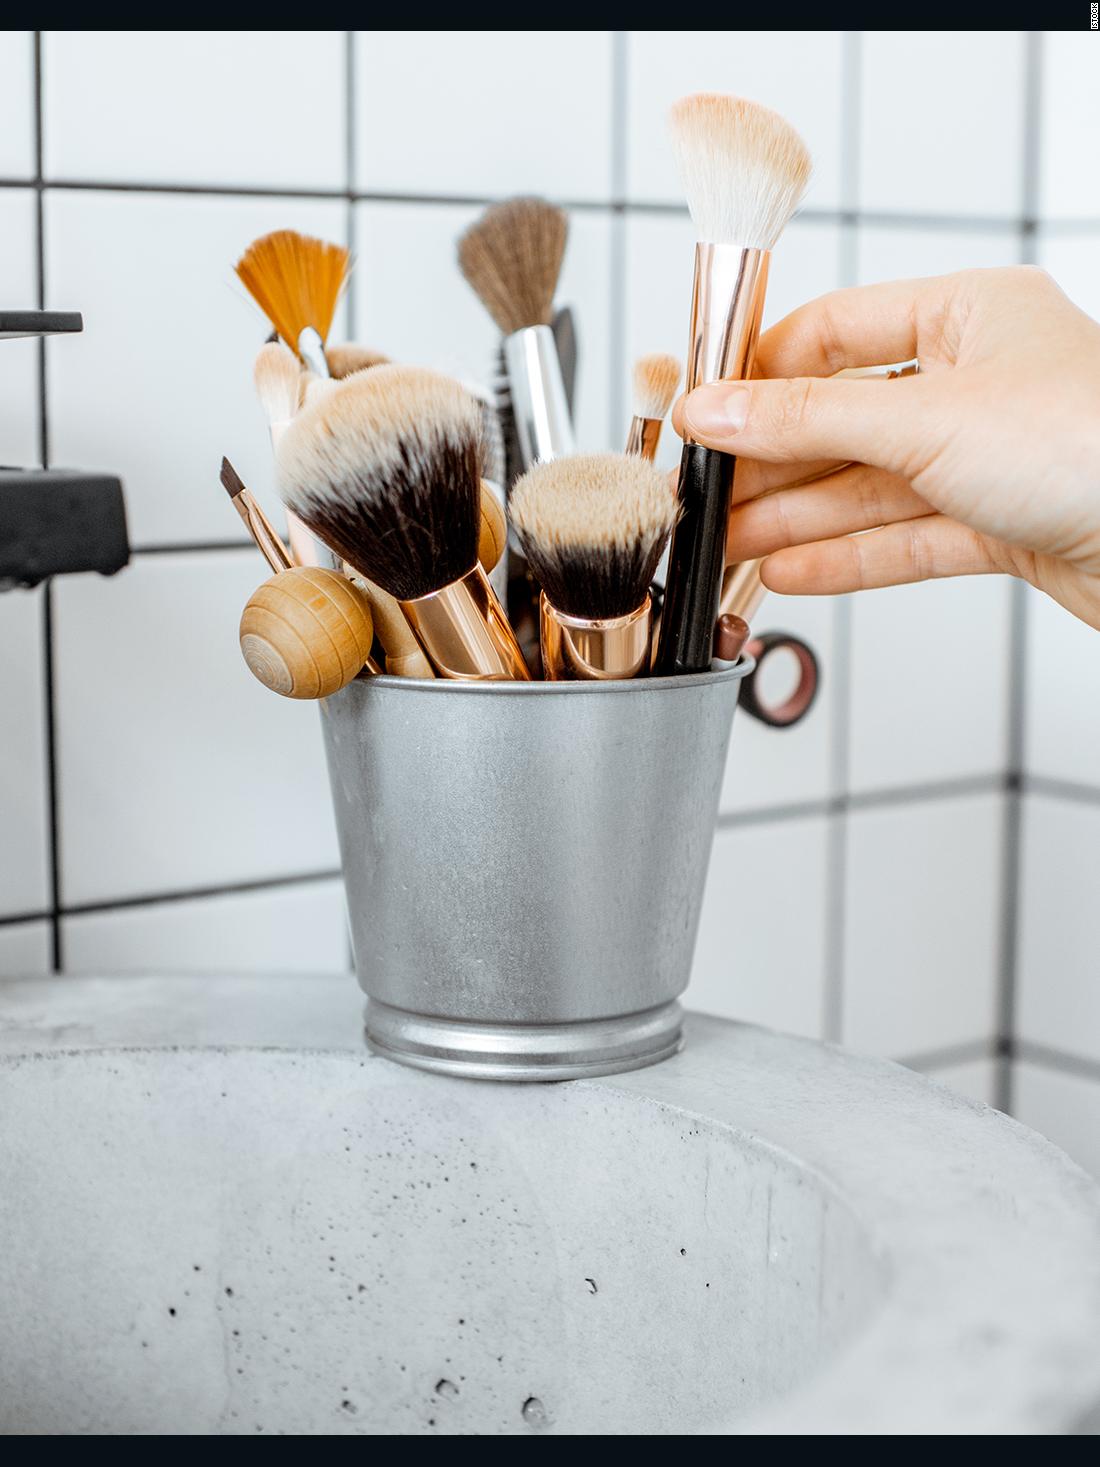 how to take care of makeup brushes